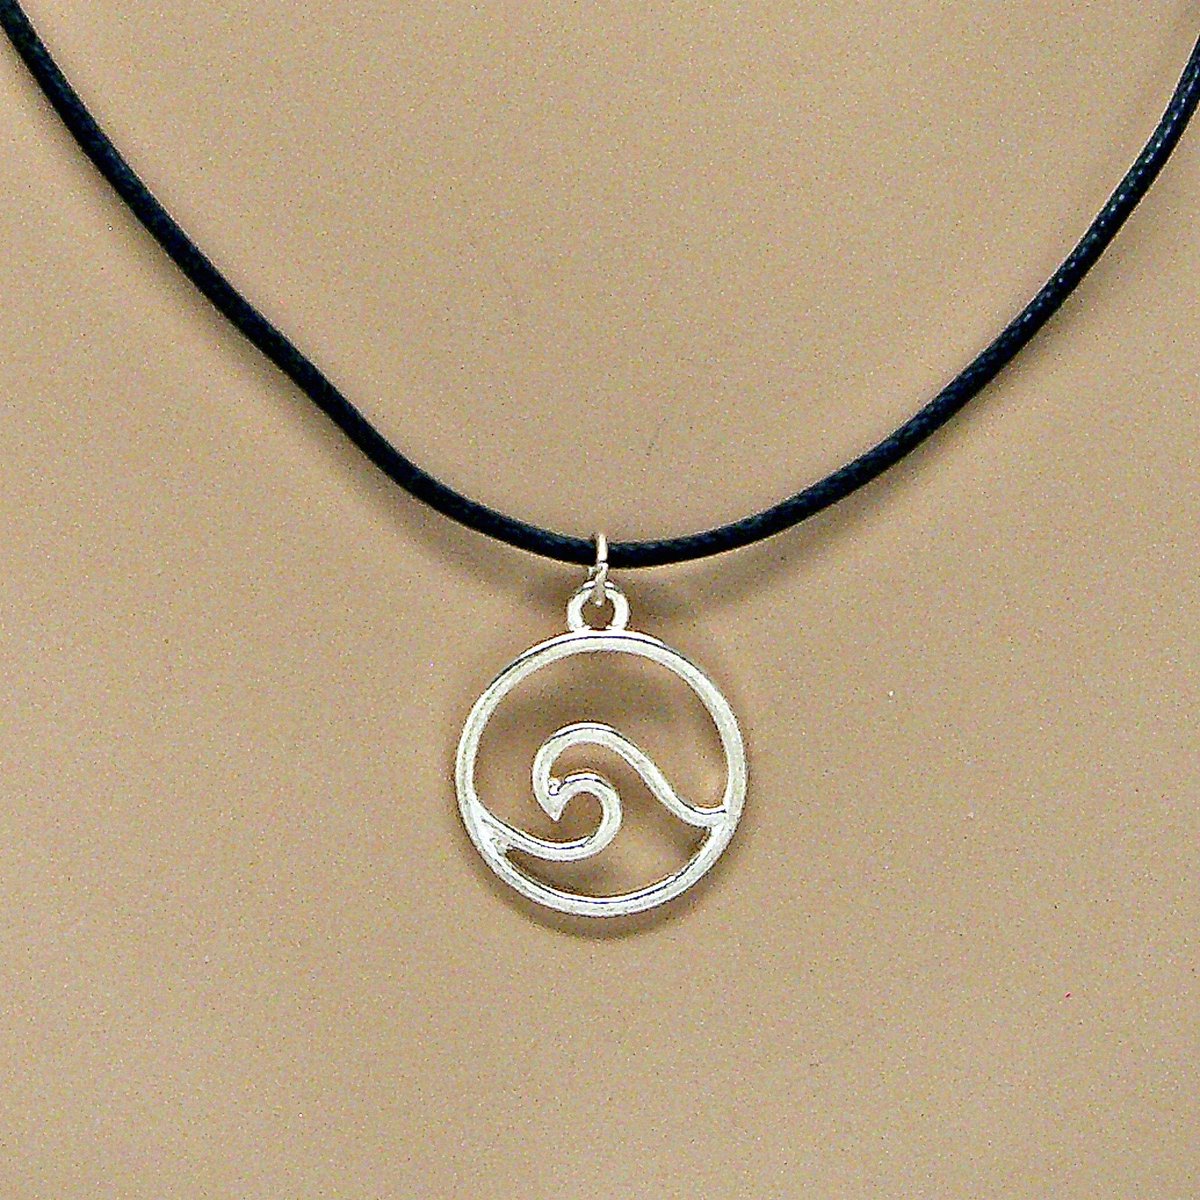 🐕 Big deals! Silver Ocean Wave Pendant on Adjustable Black Cord Necklace Minimal Surfer SUP Beach Jewelry 9001-41 only at $10.60 on etsy.com/listing/695467… Hurry. #MinimalNecklace #necklace